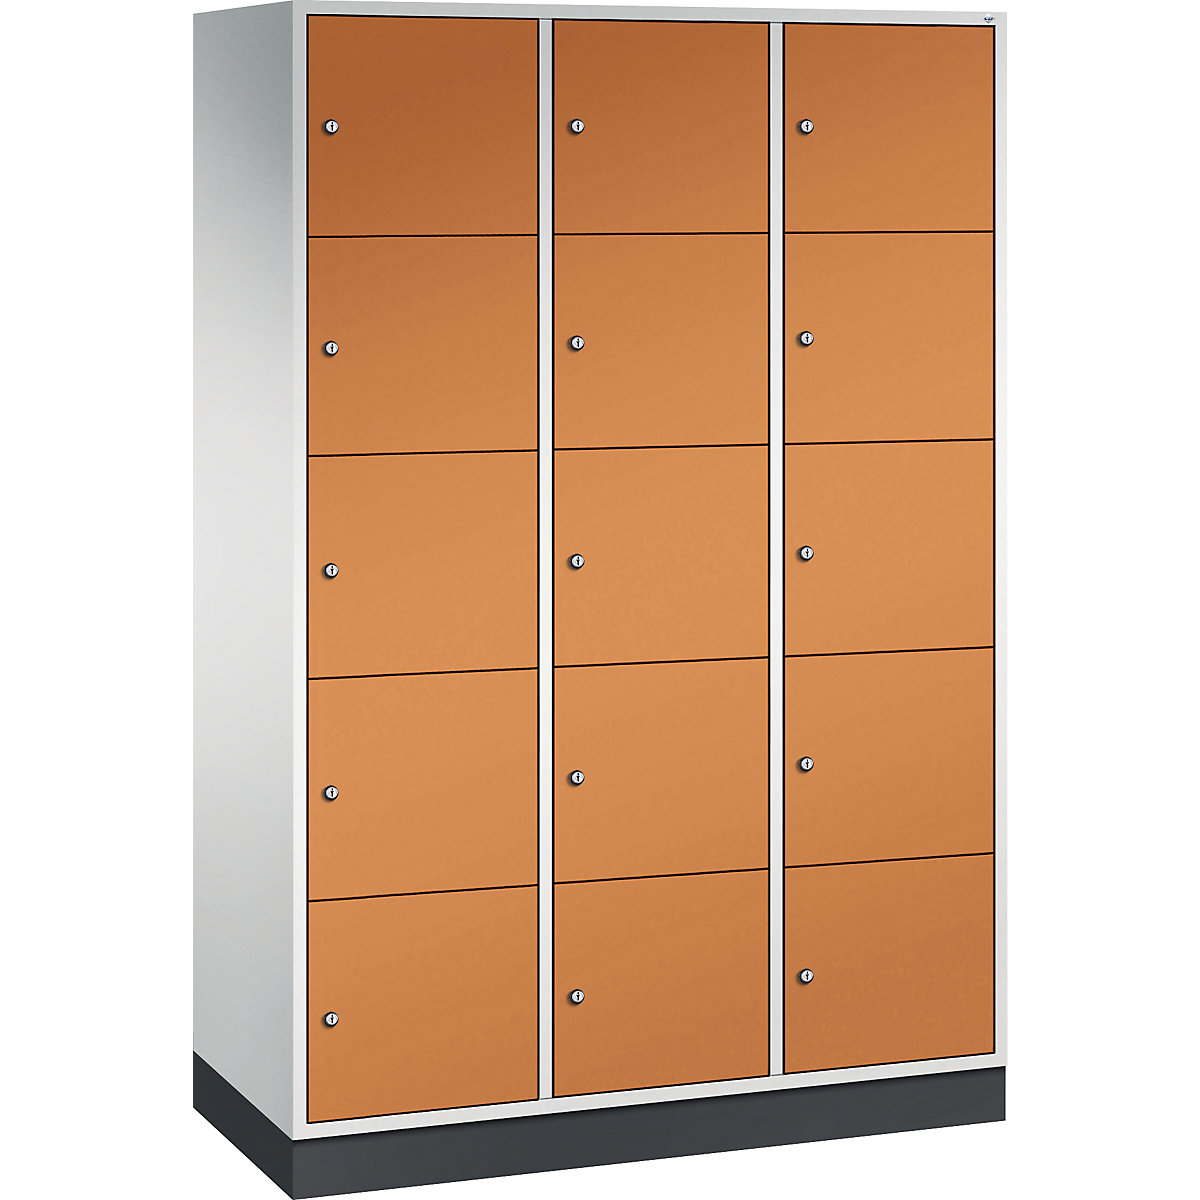 INTRO steel compartment locker, compartment height 345 mm – C+P, WxD 1220 x 500 mm, 15 compartments, light grey body, yellow orange doors